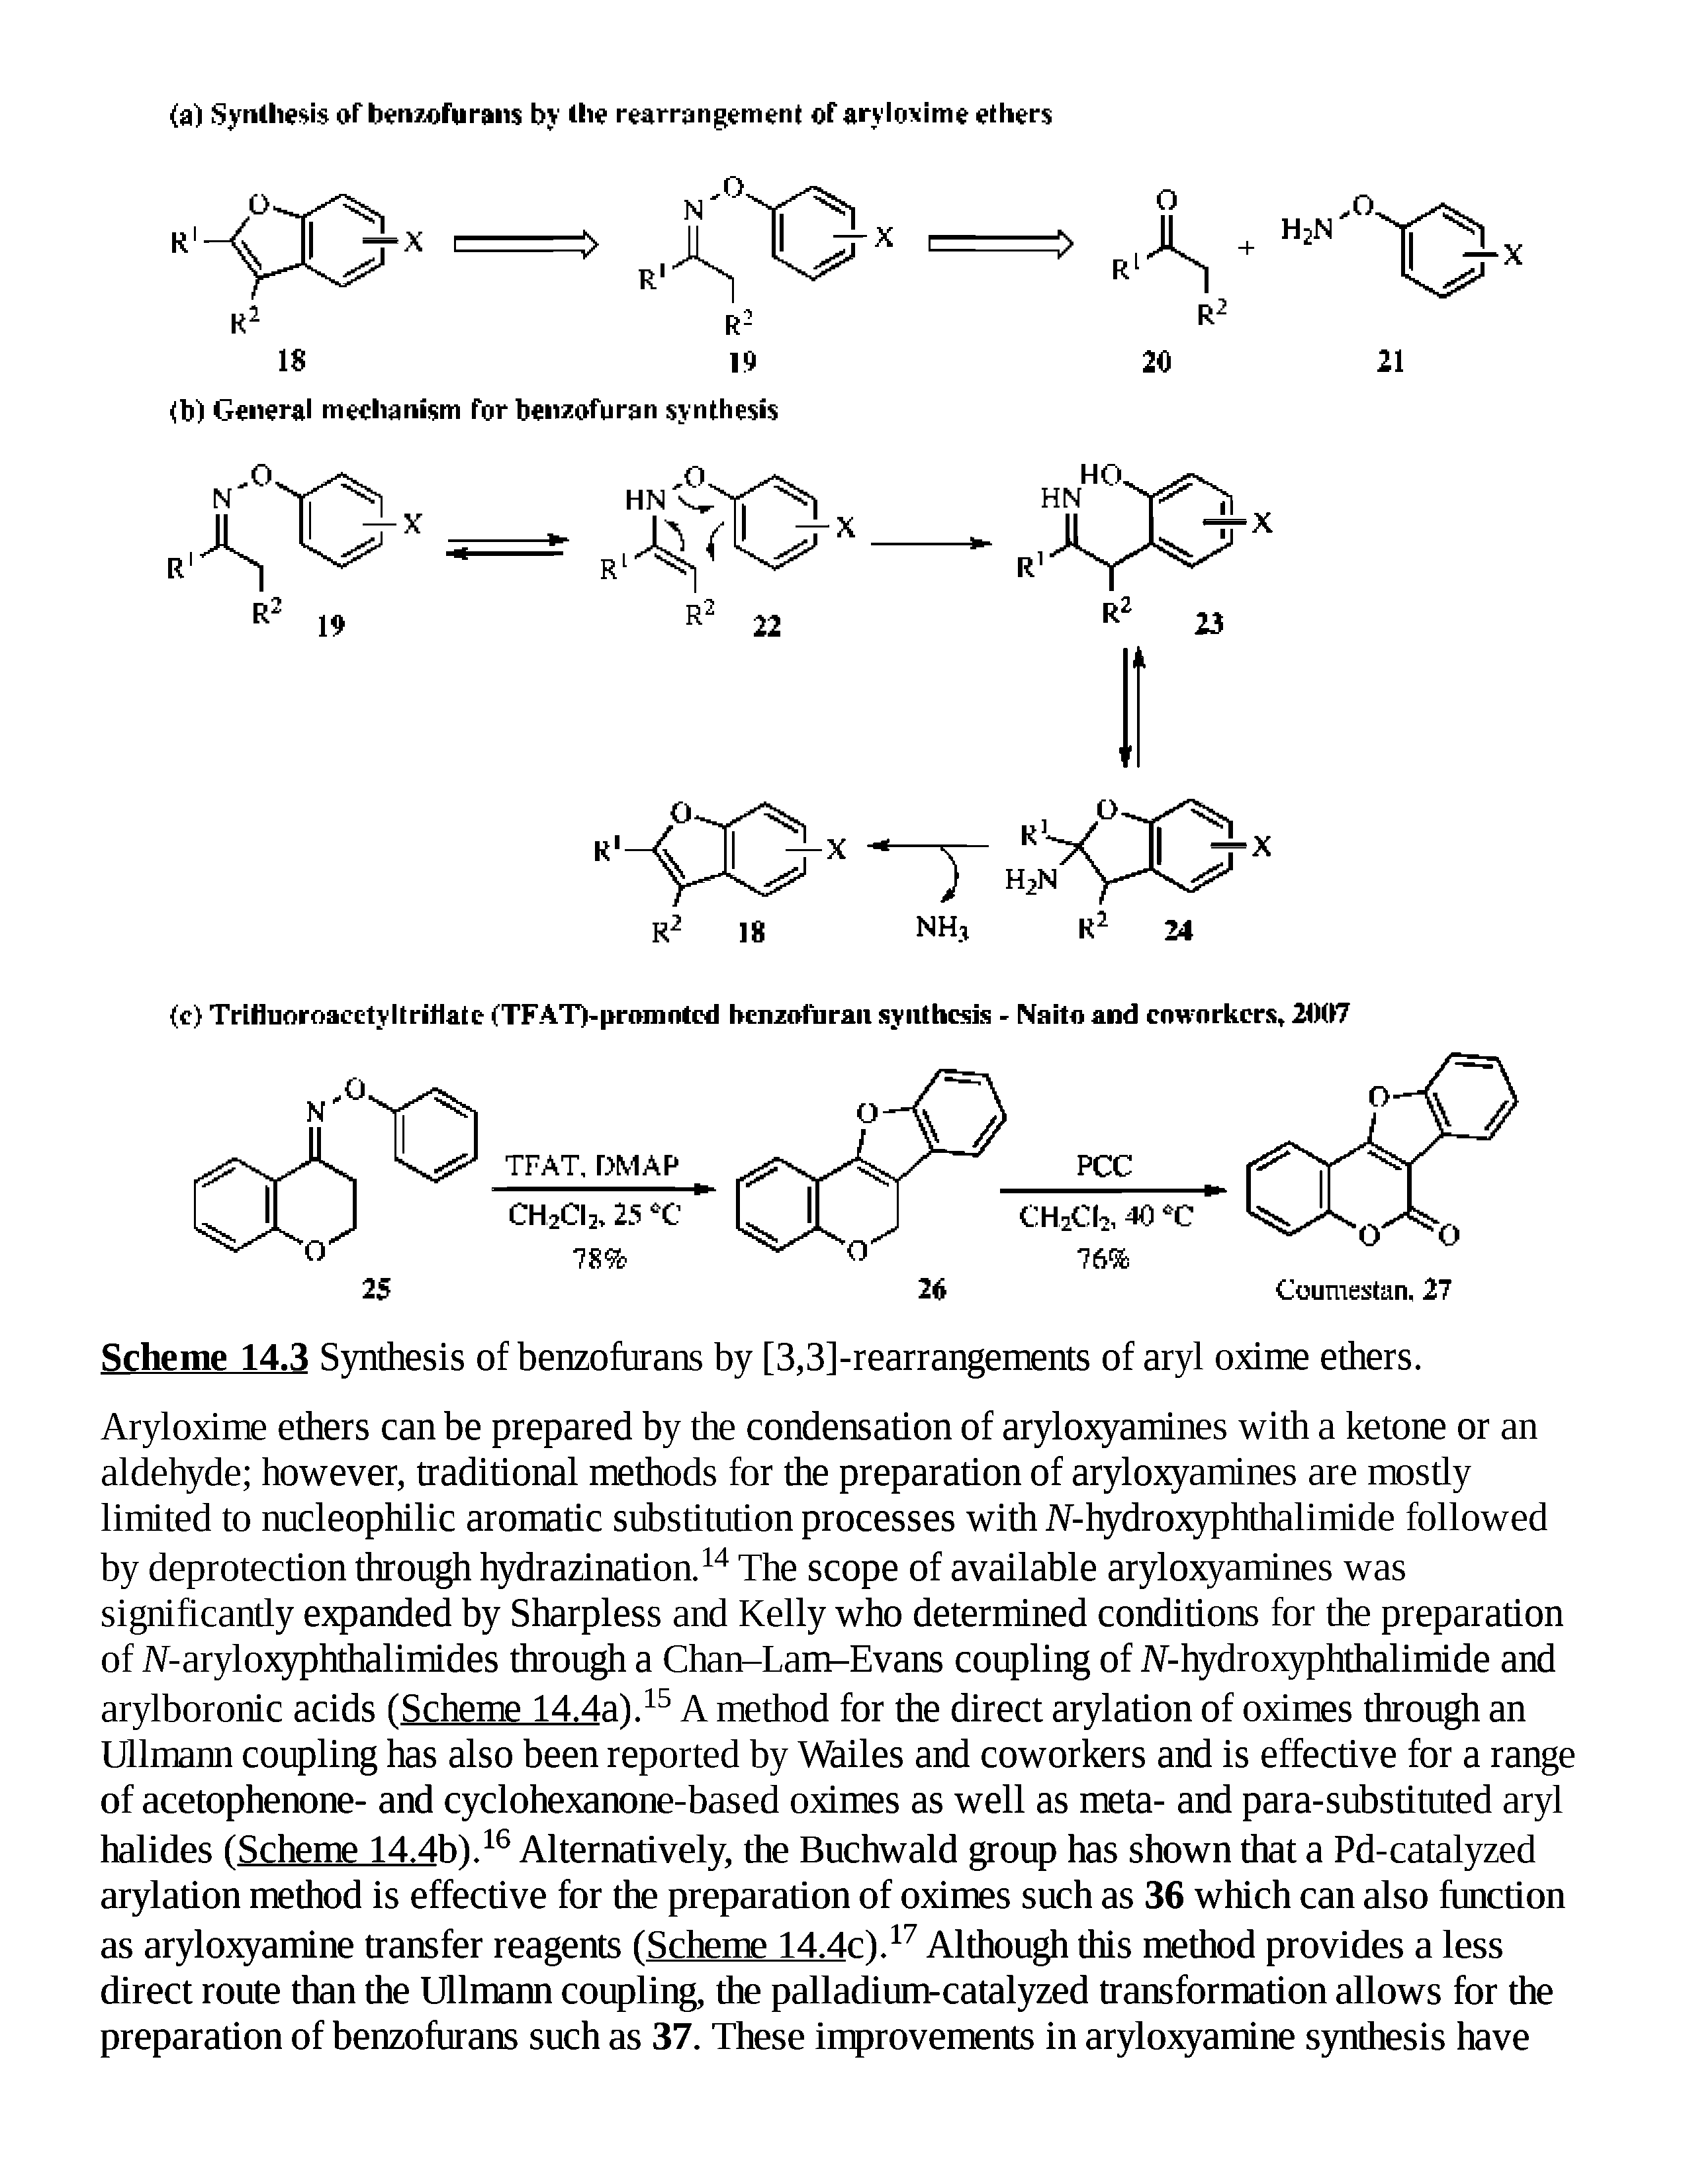 Scheme 14.3 Synthesis of benzofurans by [3,3]-rearrangements of aryl oxime ethers.